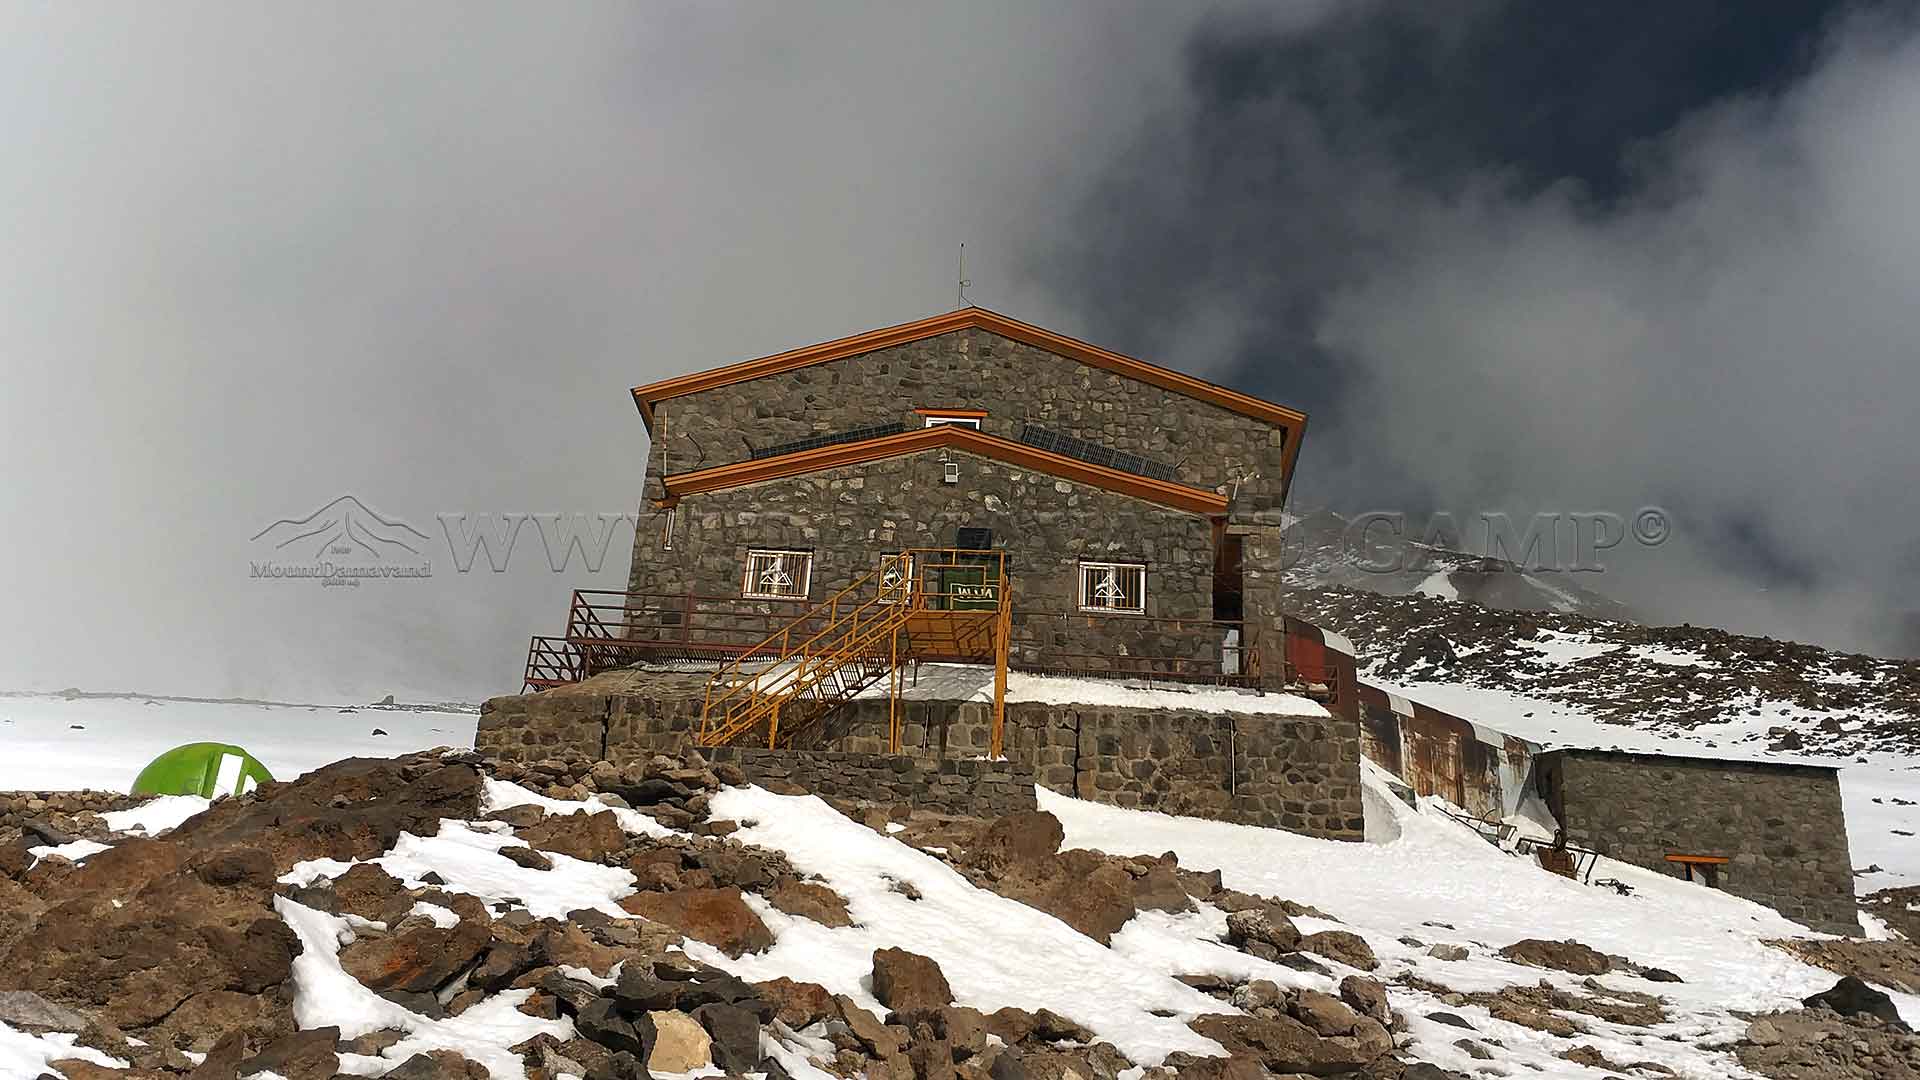 The new hut at Damavand Camp III lightly dusted with snow.